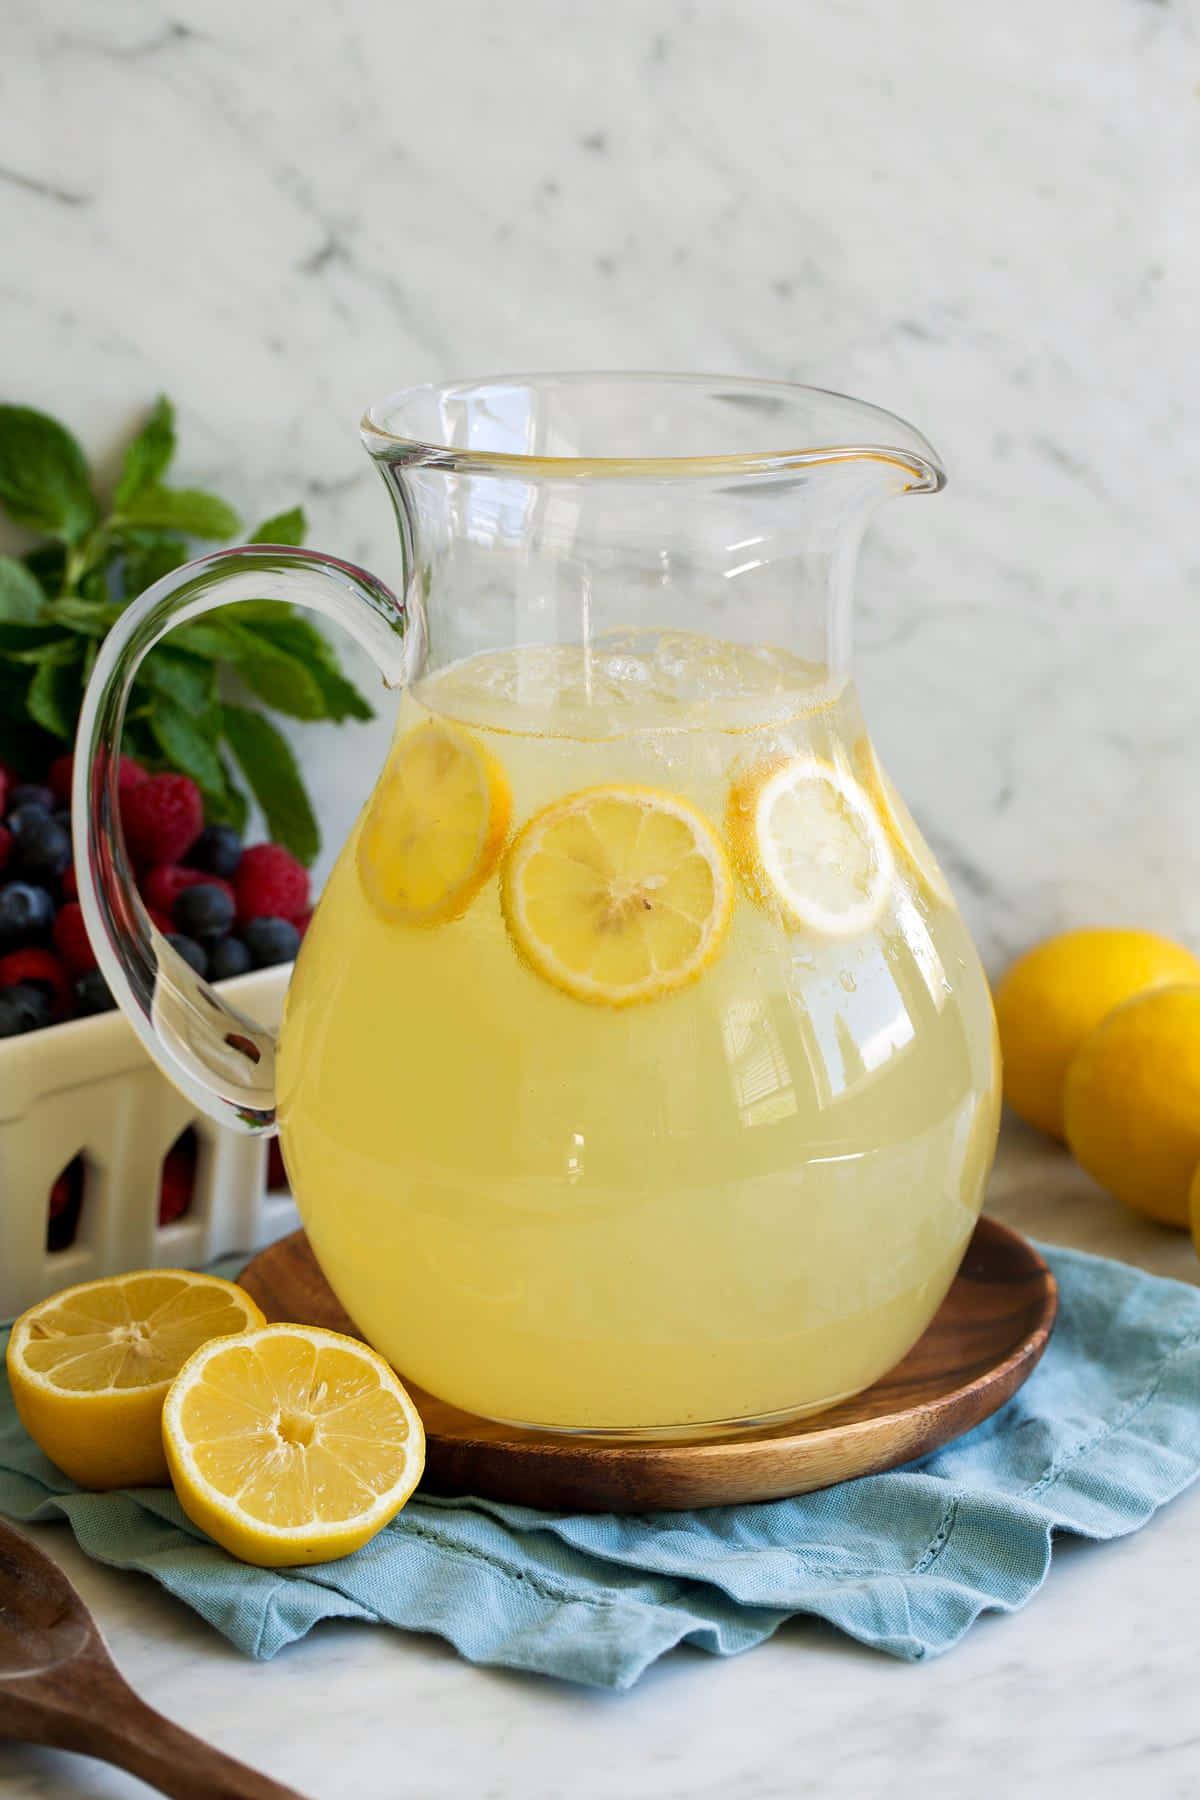 A Pitcher Of Lemonade With Lemon Slices And Berries